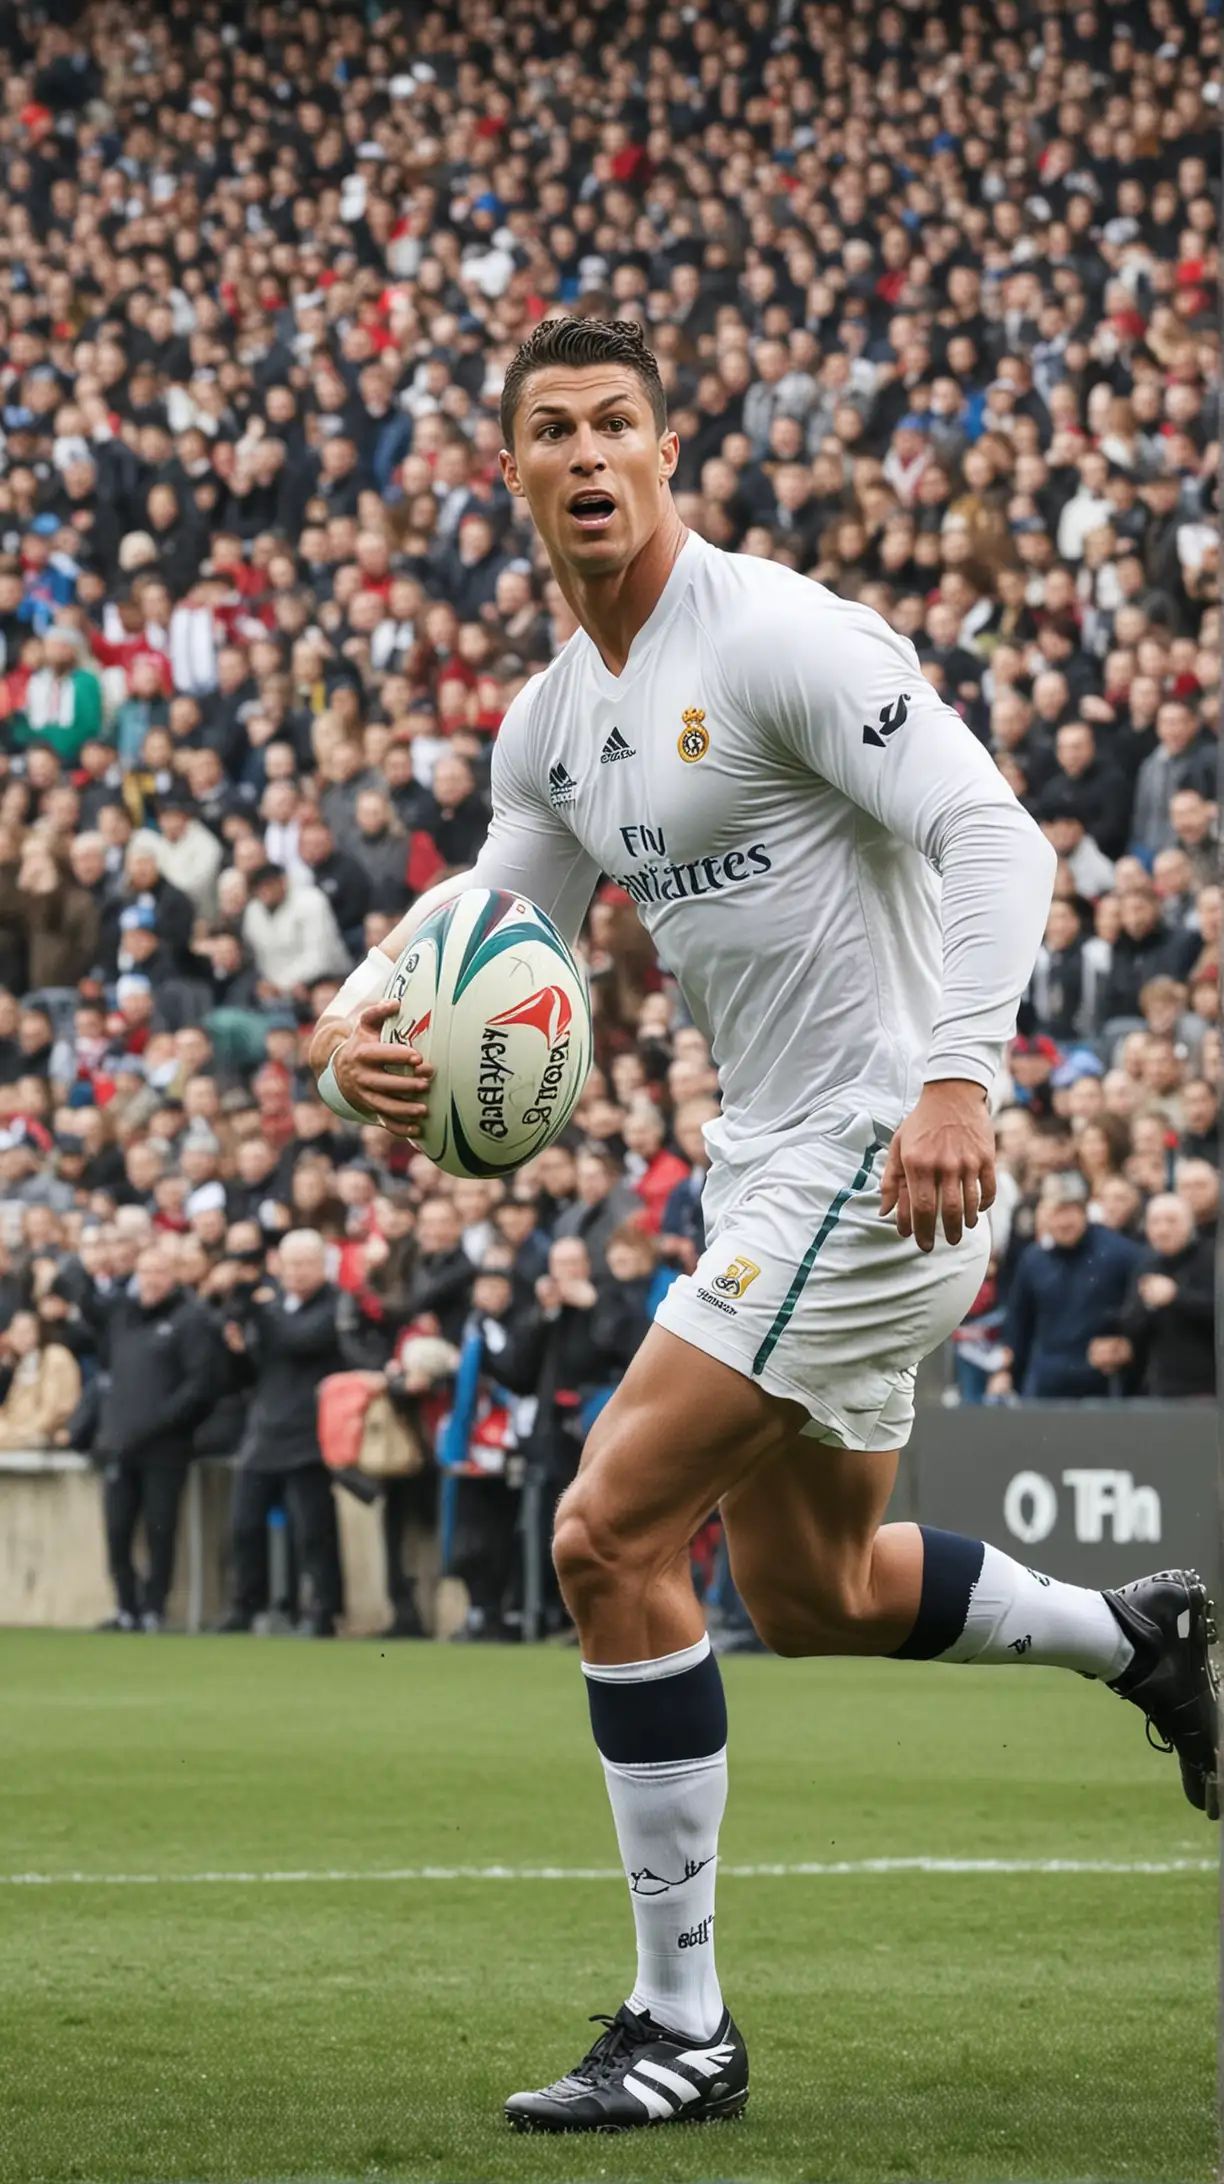 Cristiano Ronaldo is playing rugby, rugby background with Fans 